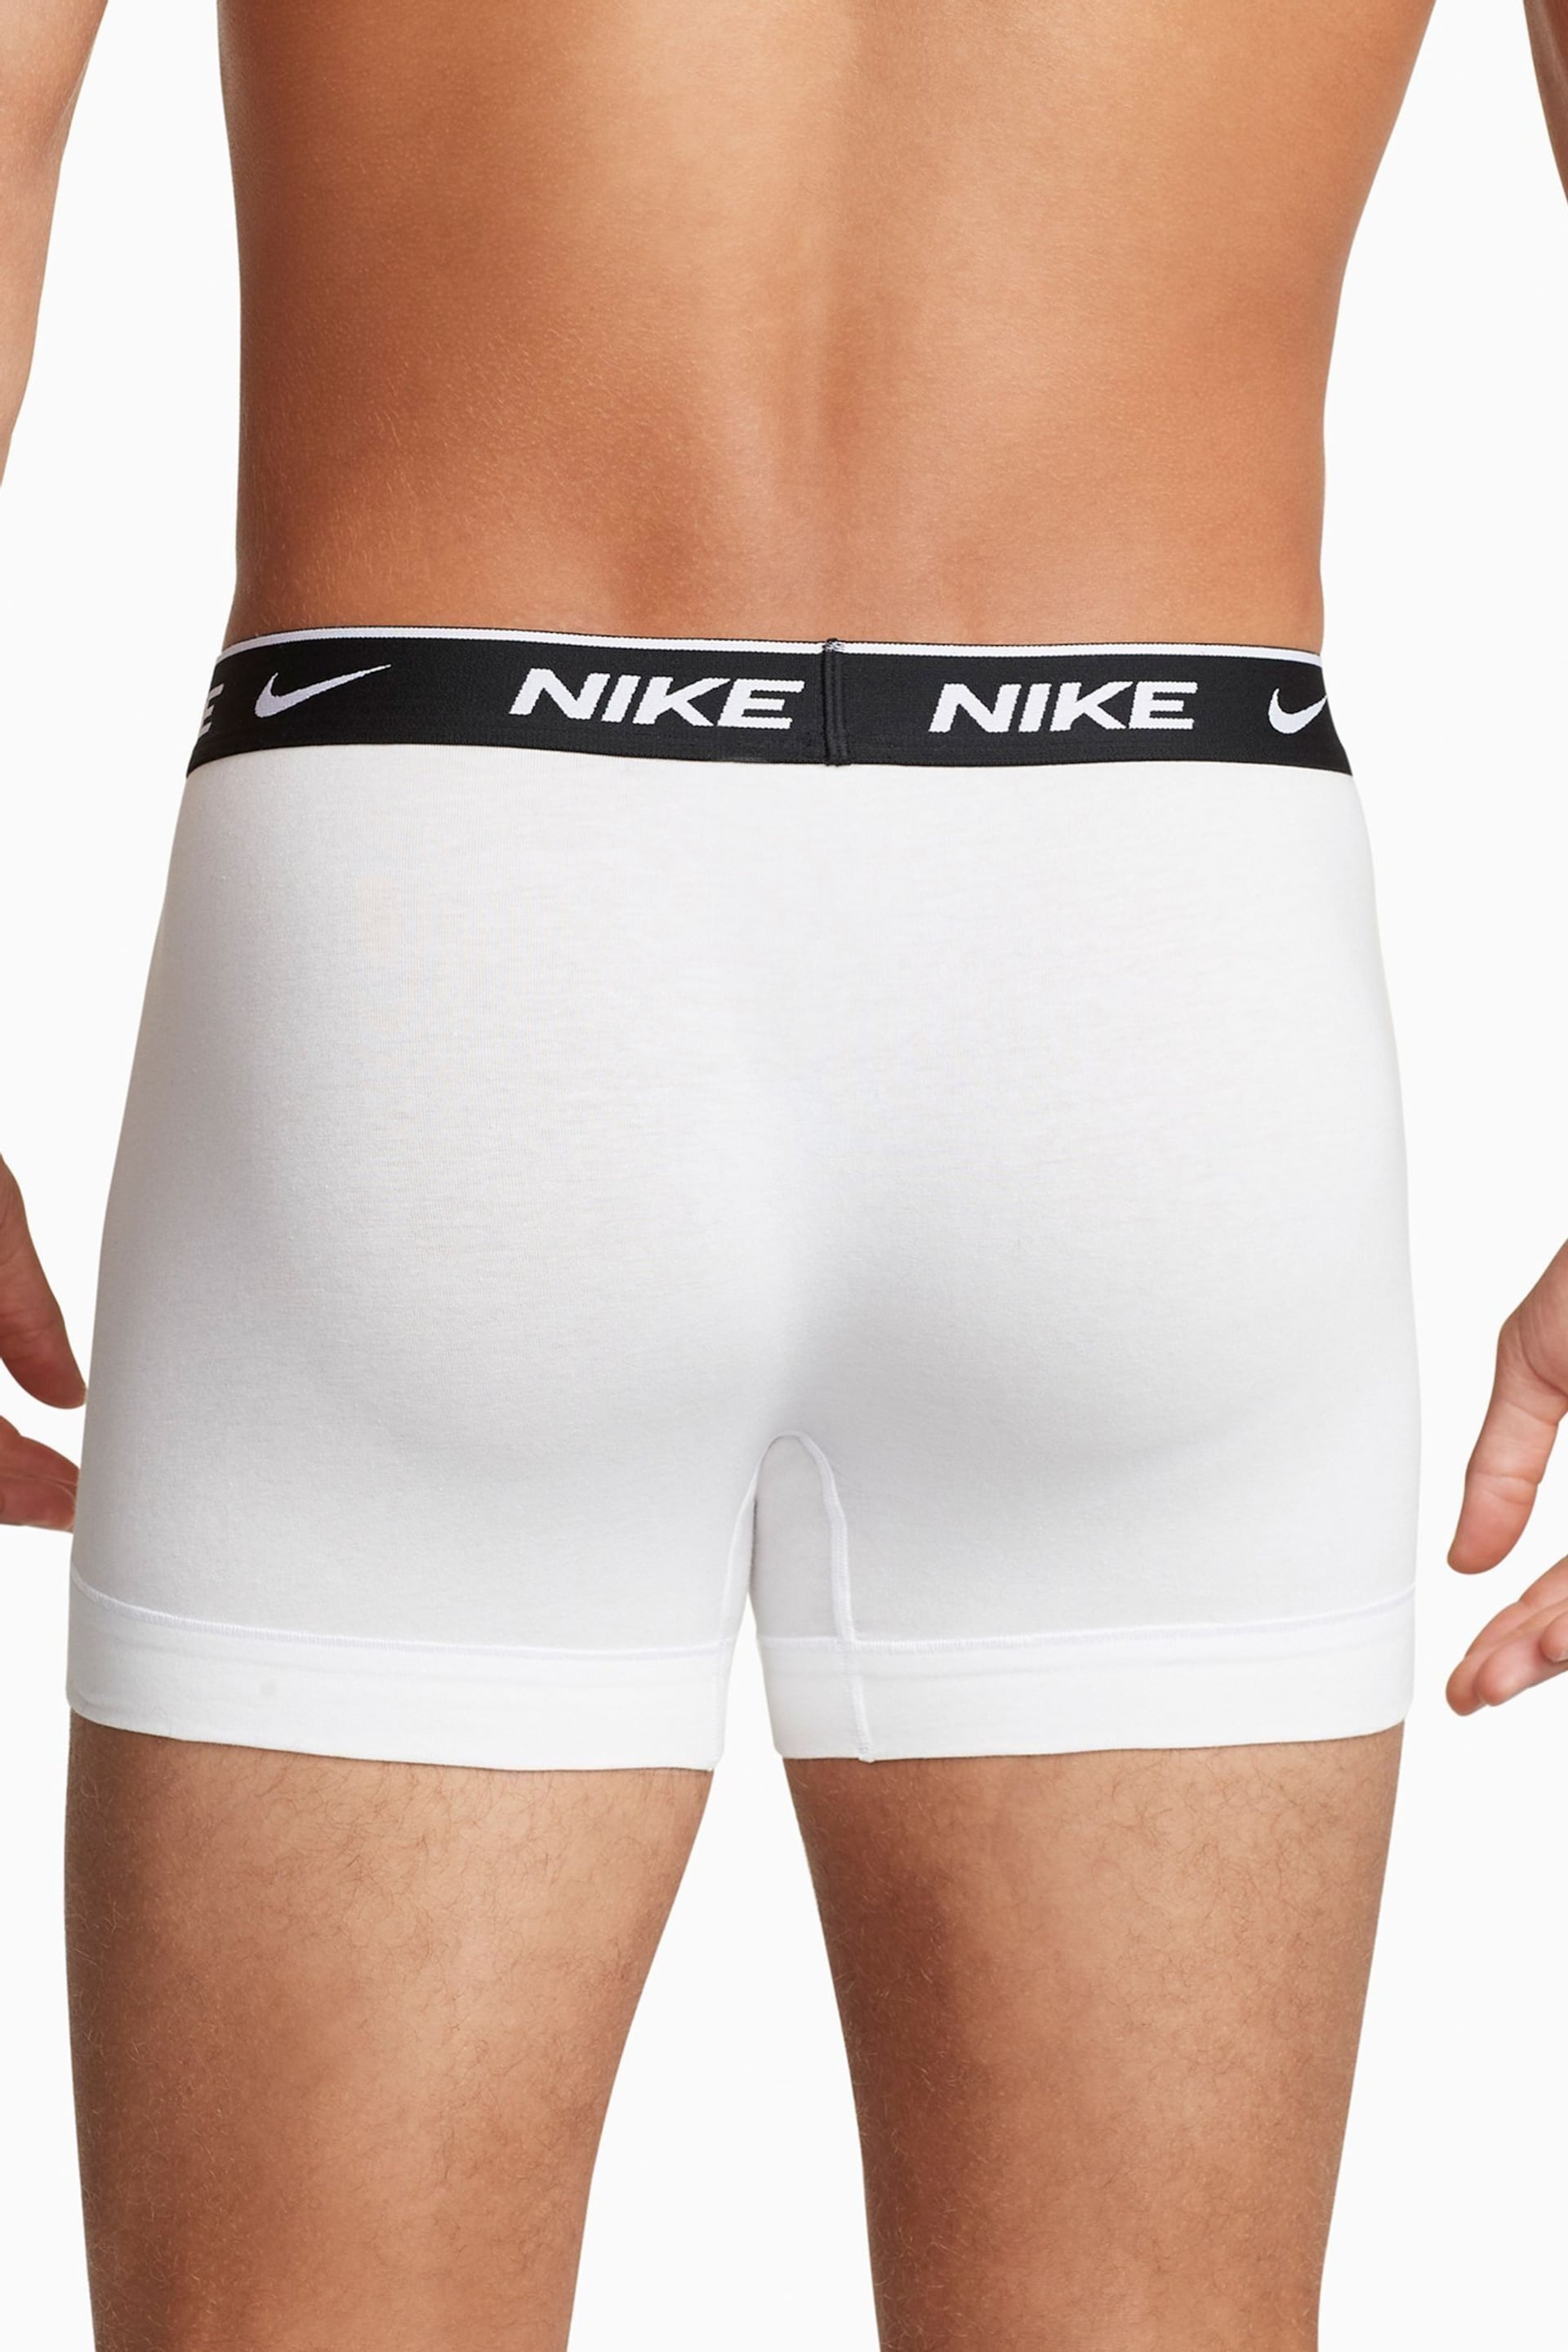 Nike White Everyday Cotton Stretch Trunks 3 Pack - Image 3 of 4